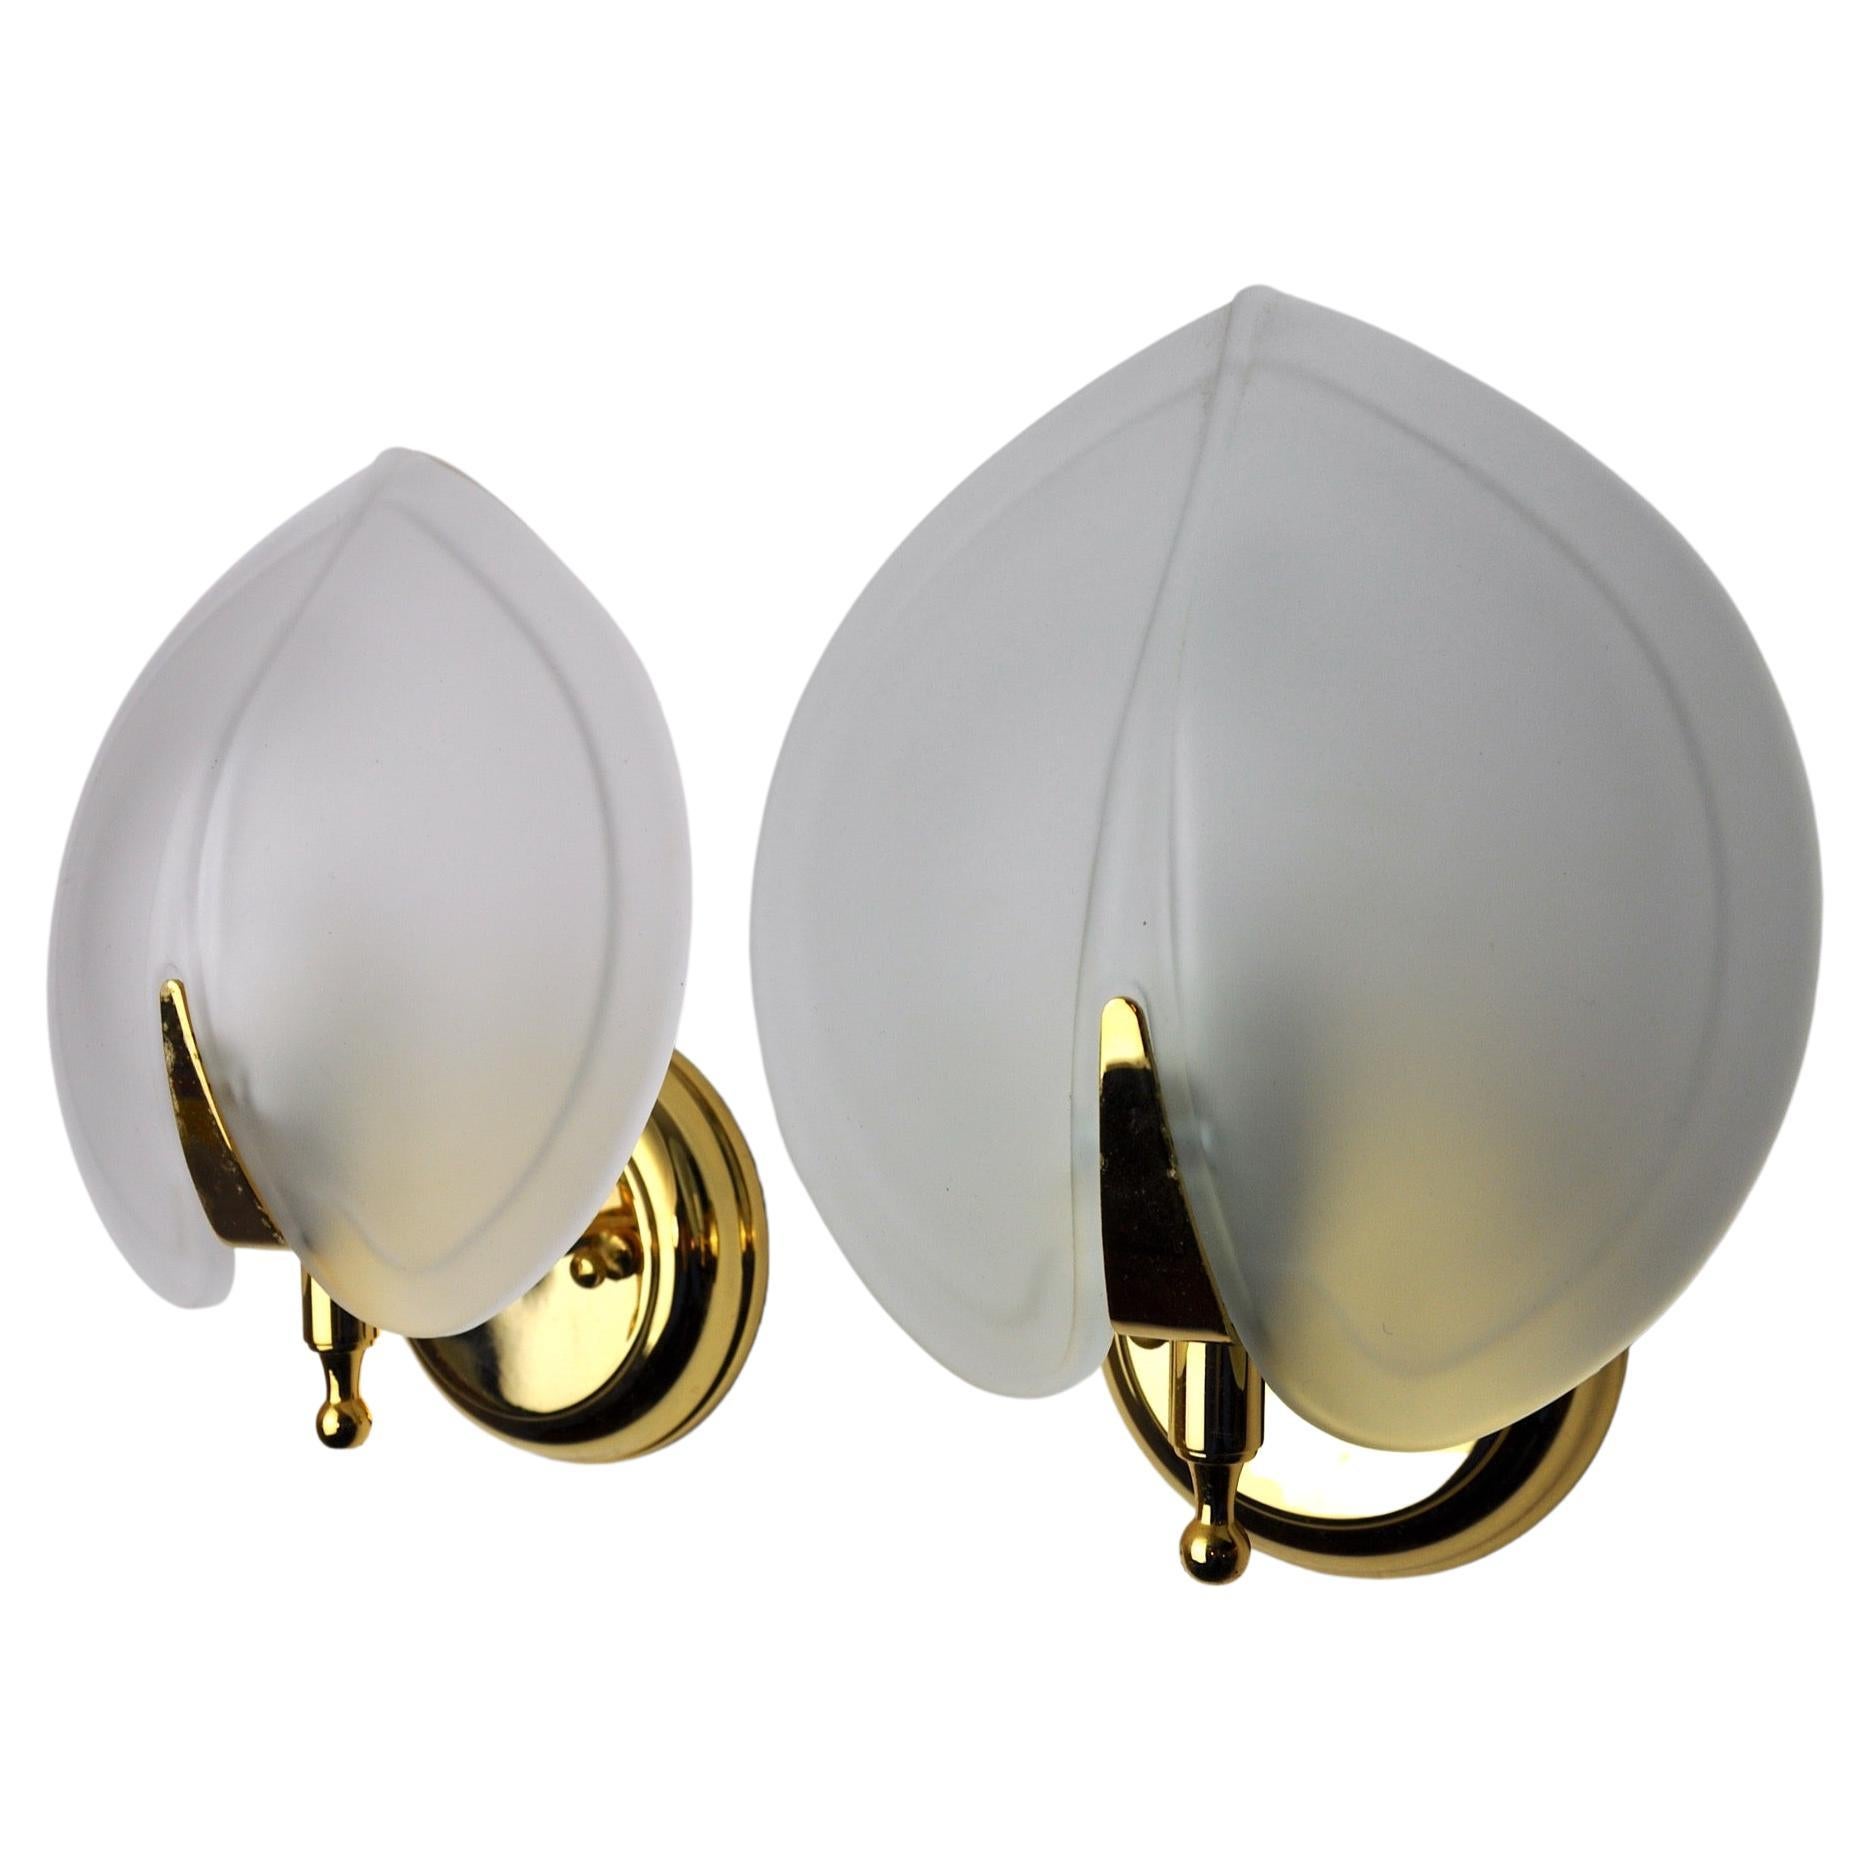 Pair of Wall Lamps "Leaf" in Opaque Glass, Murano, Italy, 1980 For Sale